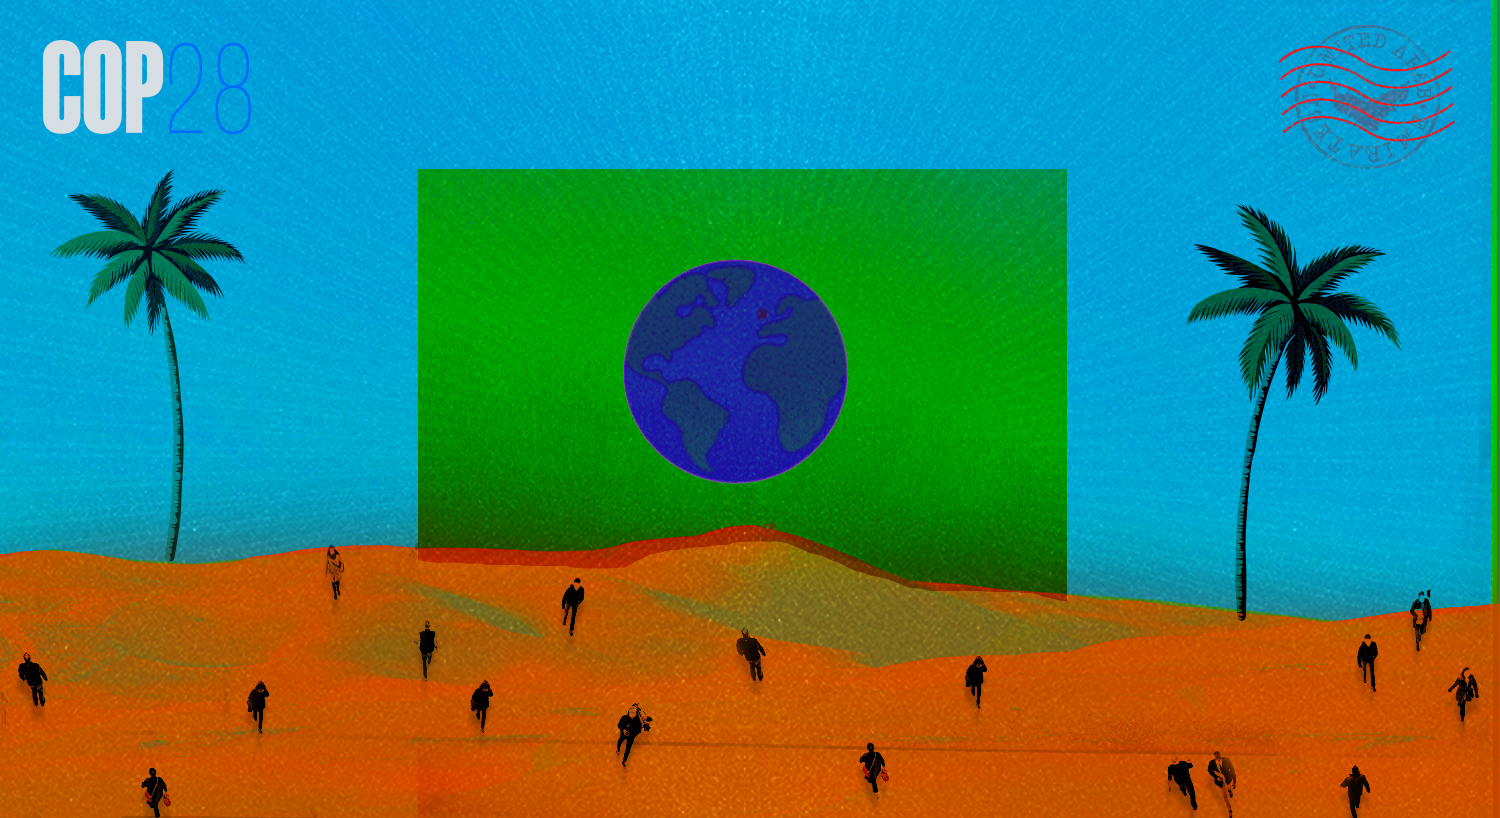 An illustrated Earth rising out of a dessert dotted with businesspeople, with COP28 written in the lefthand corner and a stamp that reads United Arab Emirates in the righthand corner.